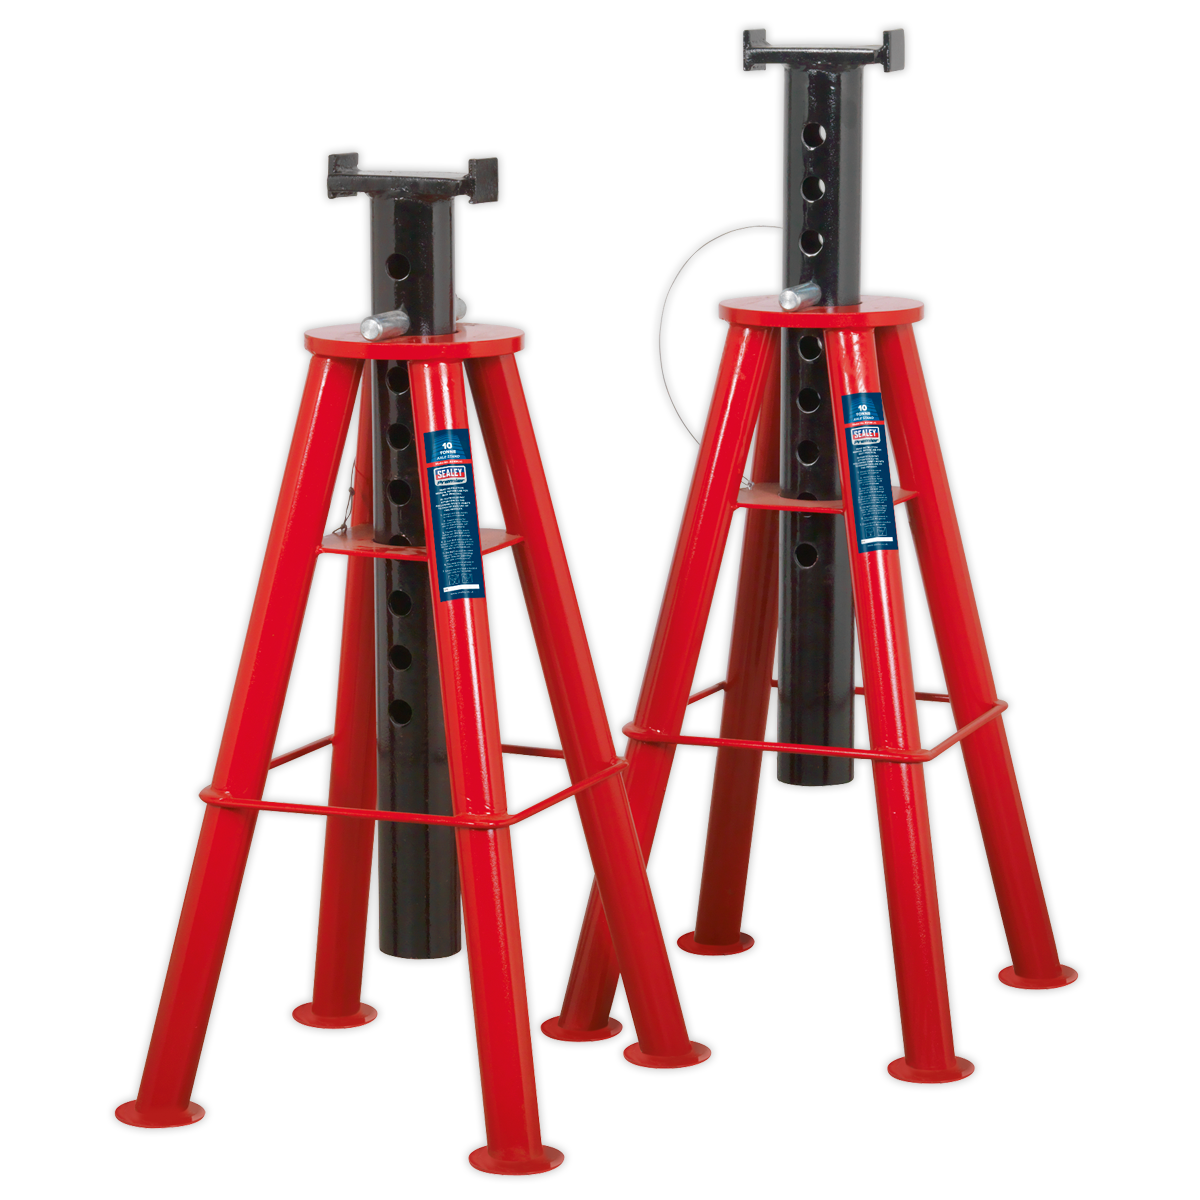 Sealey Axle Stands (Pair) 10 Tonne Capacity per Stand High Level